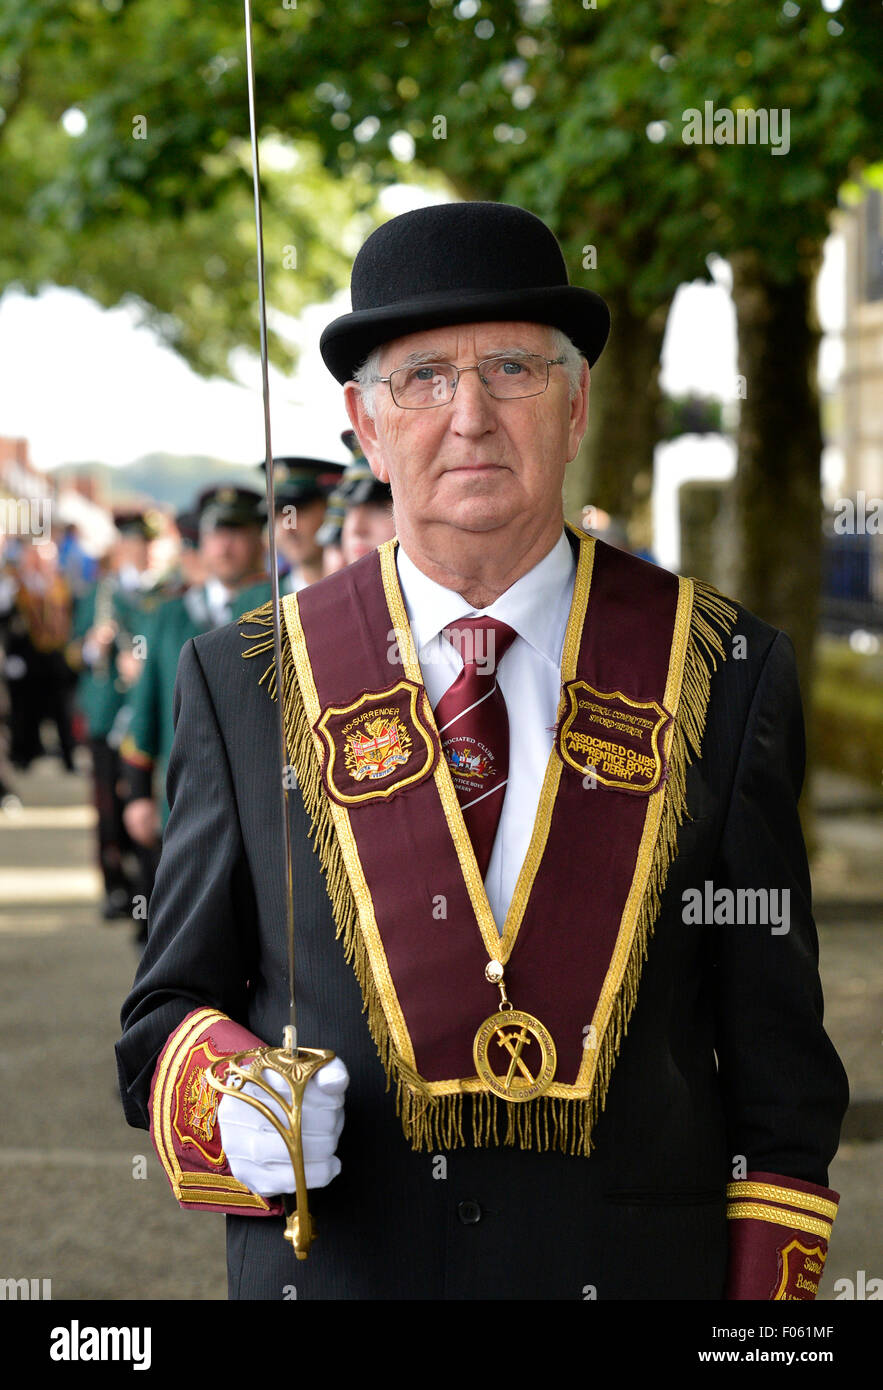 Londonderry, Northern Ireland. 8th Aug, 2015. The General Committee of the Apprentice Boys of Derry accompanied by members and bands parade on Derry Walls as part of the commemoration of the 326th Anniversary of the Relief of Londonderry. The Siege of Derry began in December 1688 and was lifted on 28 July 1689. Credit: George Sweeney / Alamy Live News Stock Photo